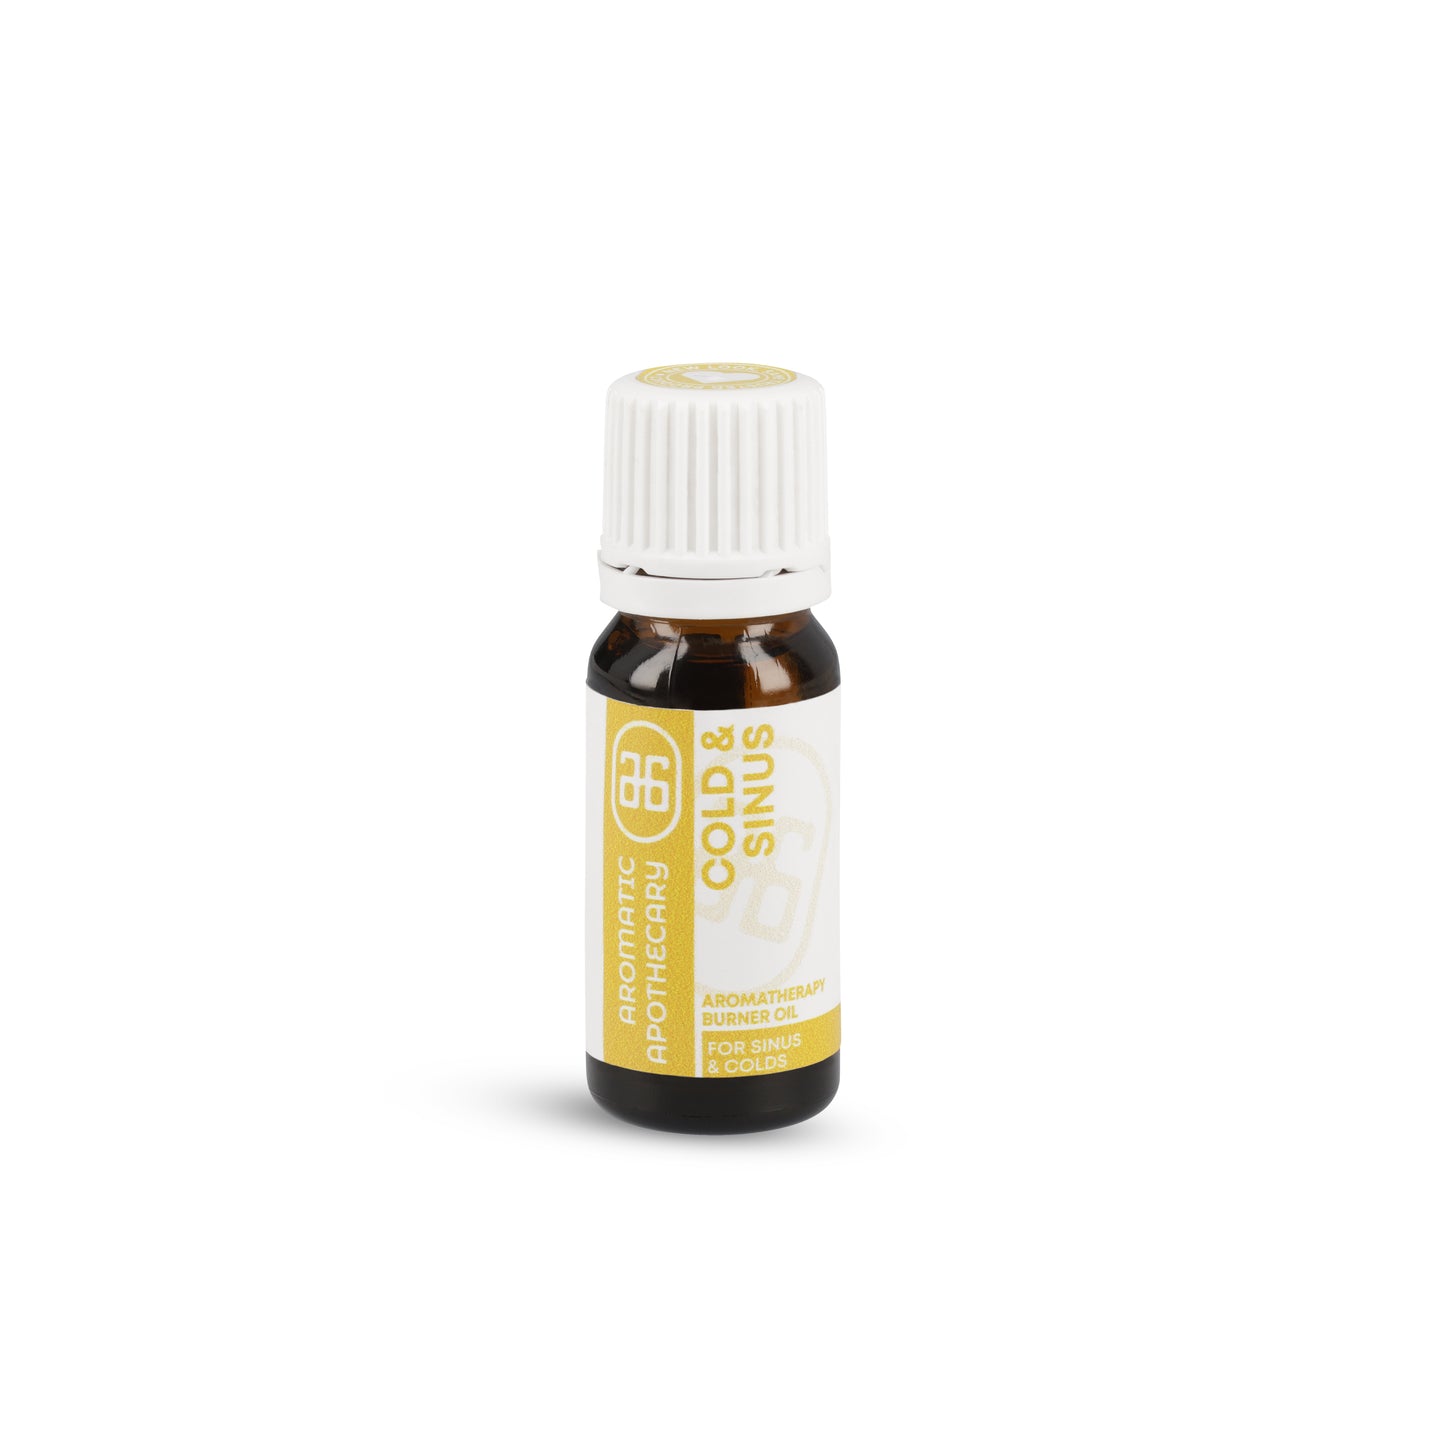 Aromatic Apothecary - Cold & Sinus burner oil - 12ml